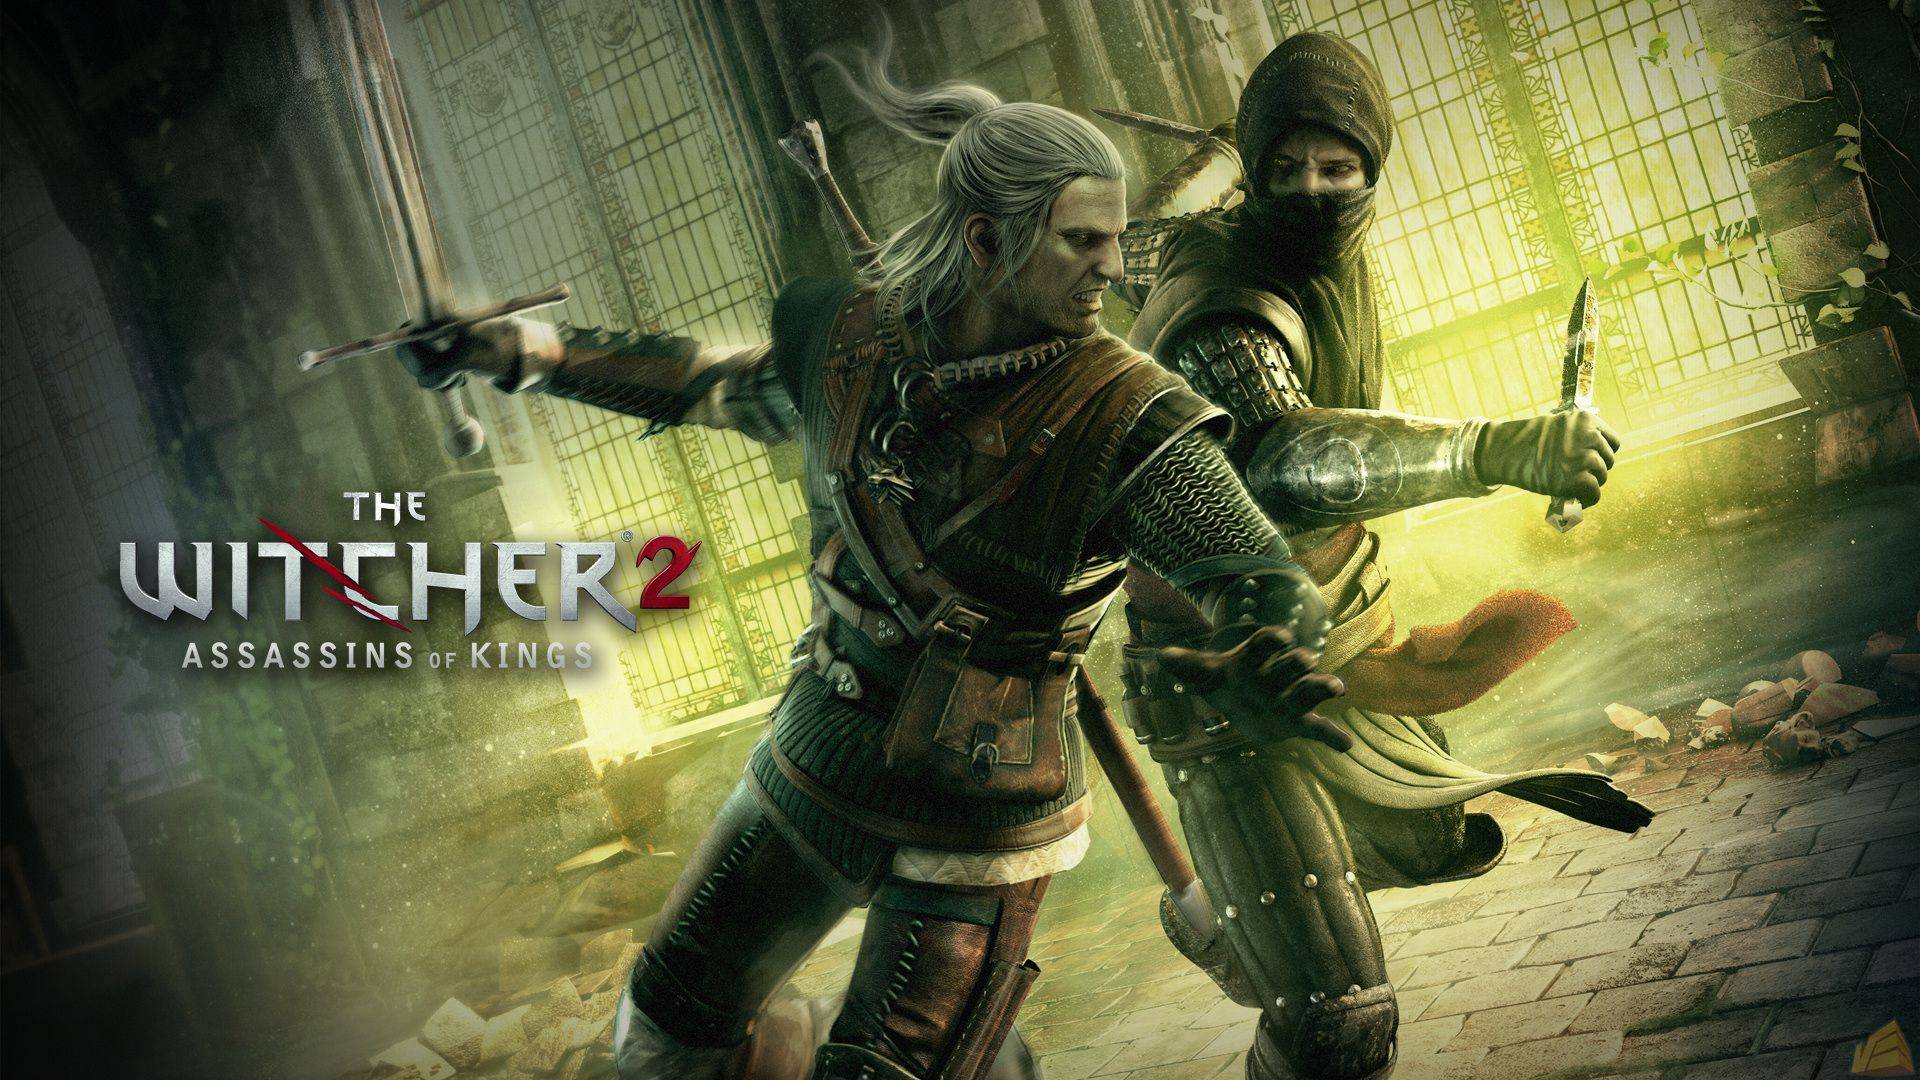 Game Awards, The Witcher 2, The Witcher 2: Assassins of Kings, The Witcher 3, بازی ویچر (The Witcher), شرکت سی دی پراجکت رد (CD Projekt Red), کنسول Xbox One, گرالت آف ریویا